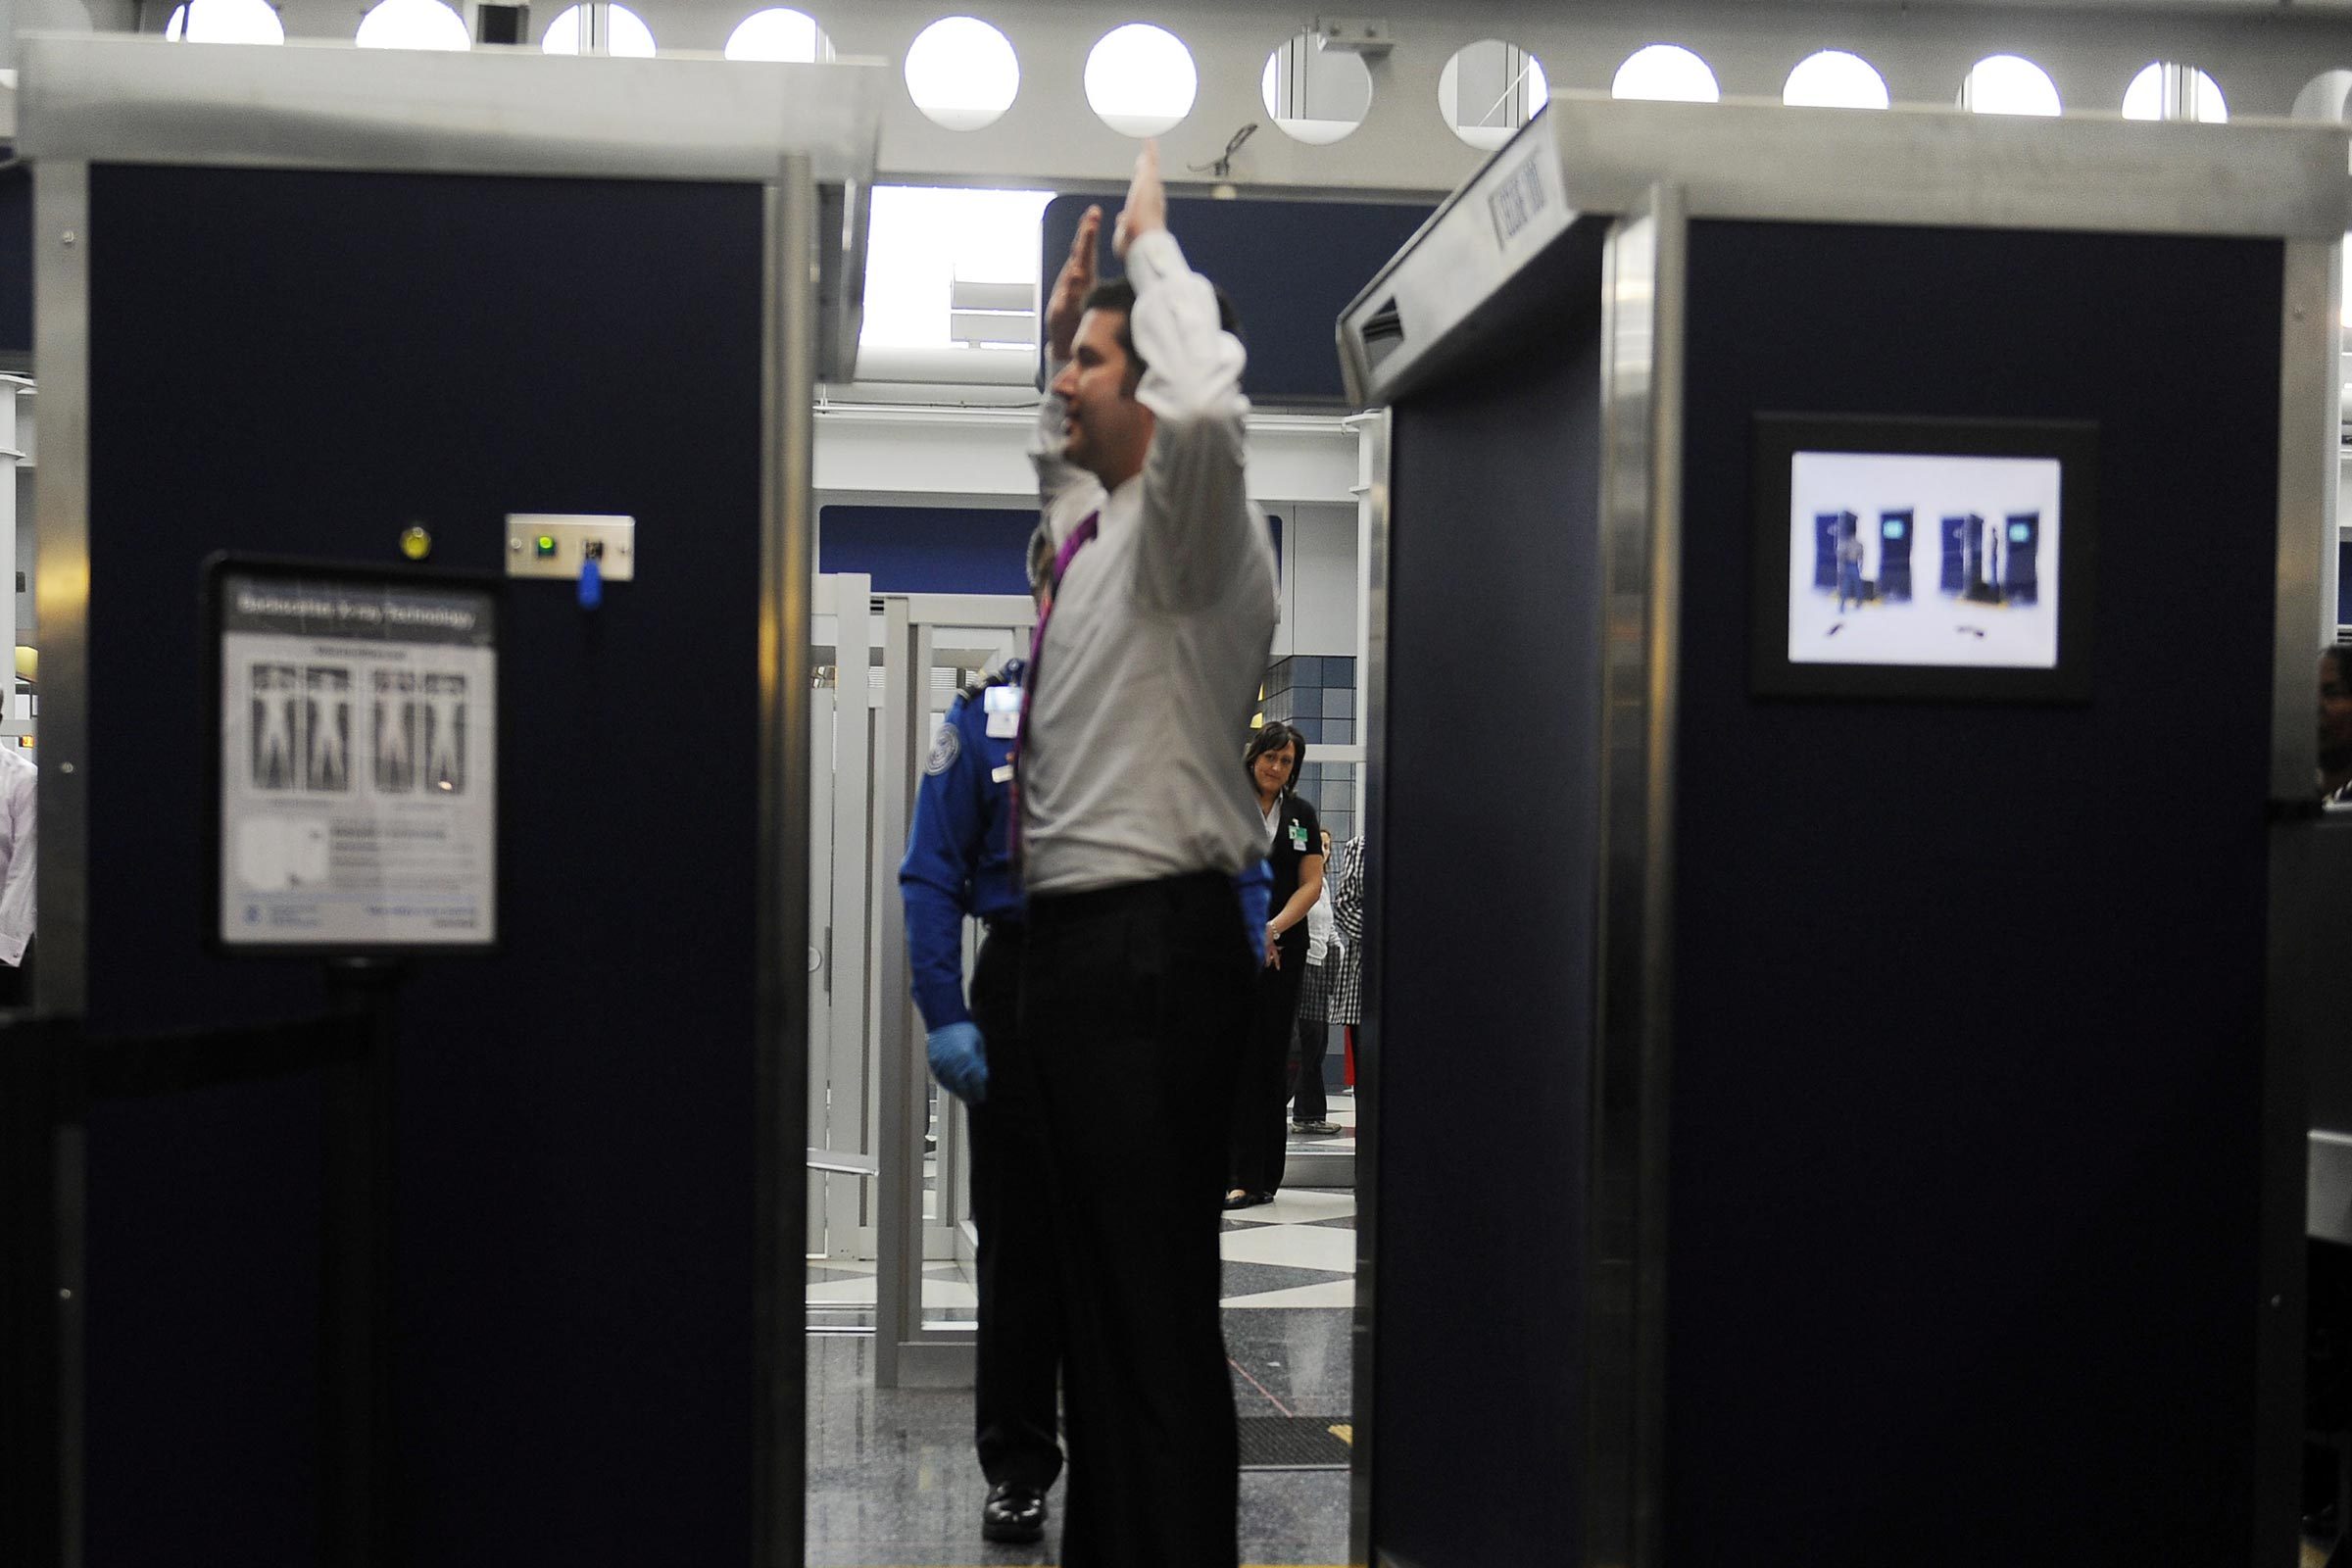 This Is What You Need to Know About Those Full-Body Airport Security Scanners